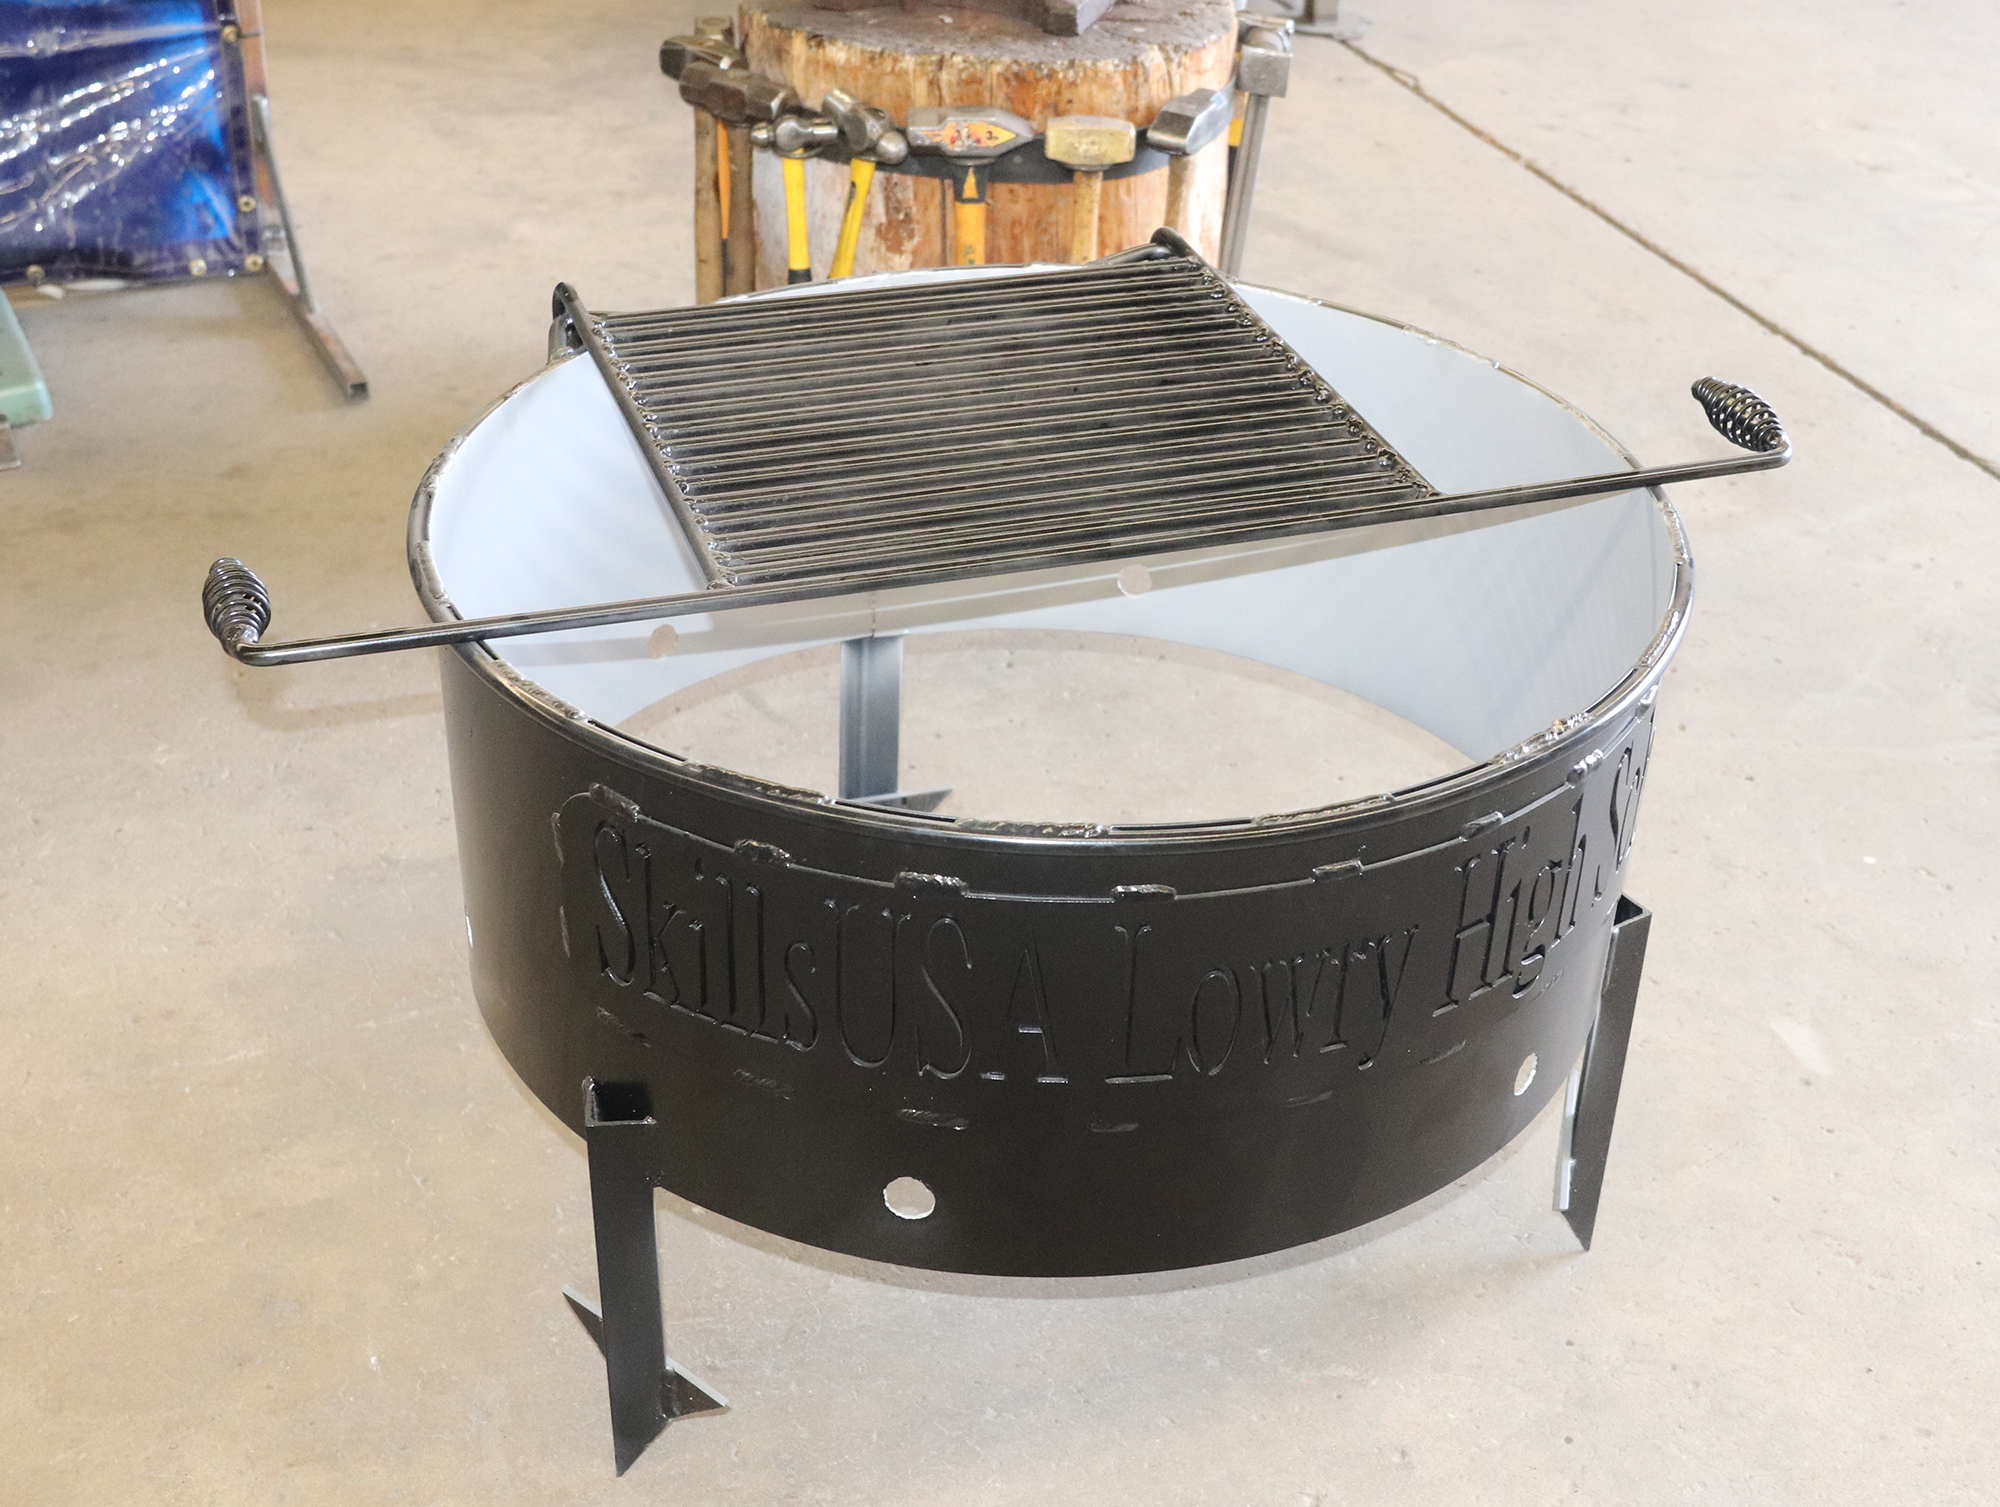 A fire pit built by Skills USA members. /Ron Espinola • The Brand